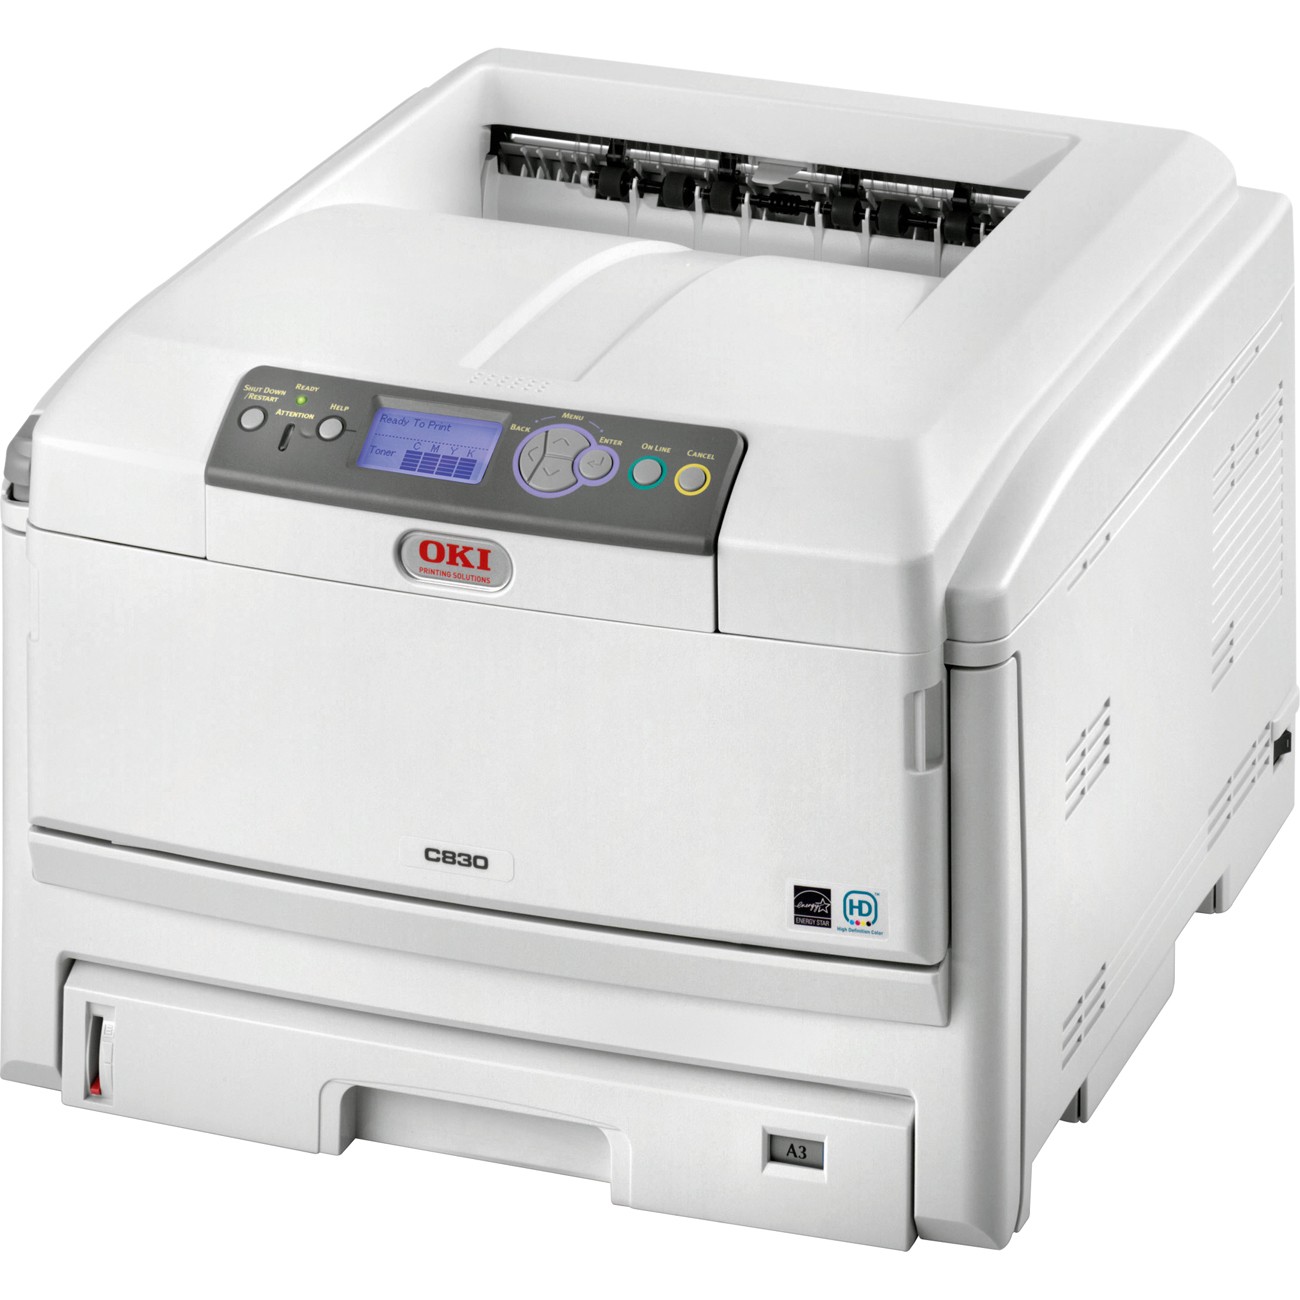 Okidata C9650N LED Printer.up to 11x 17 and 12x18 paper size. 4 Paper Trays  (DEMO UNIT) 